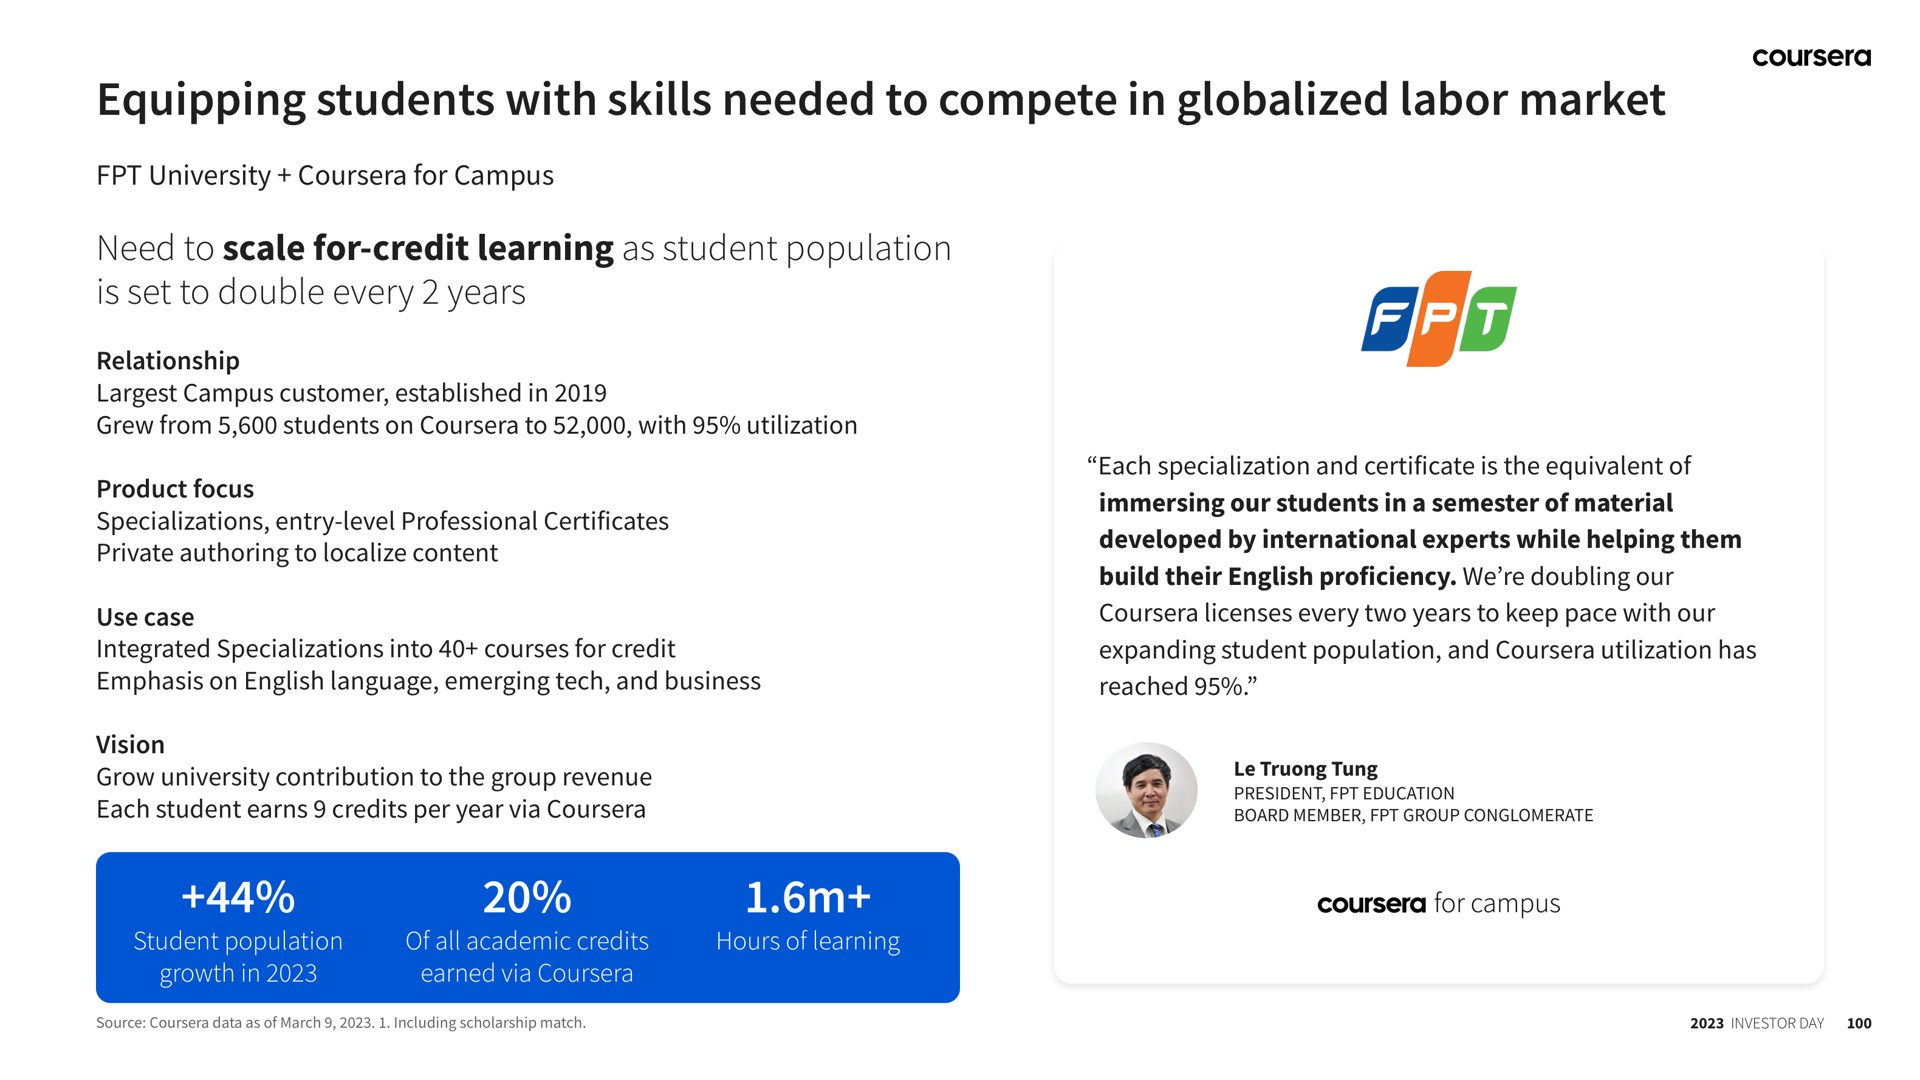 equipping students with skills needed to compete in labor market a | Coursera